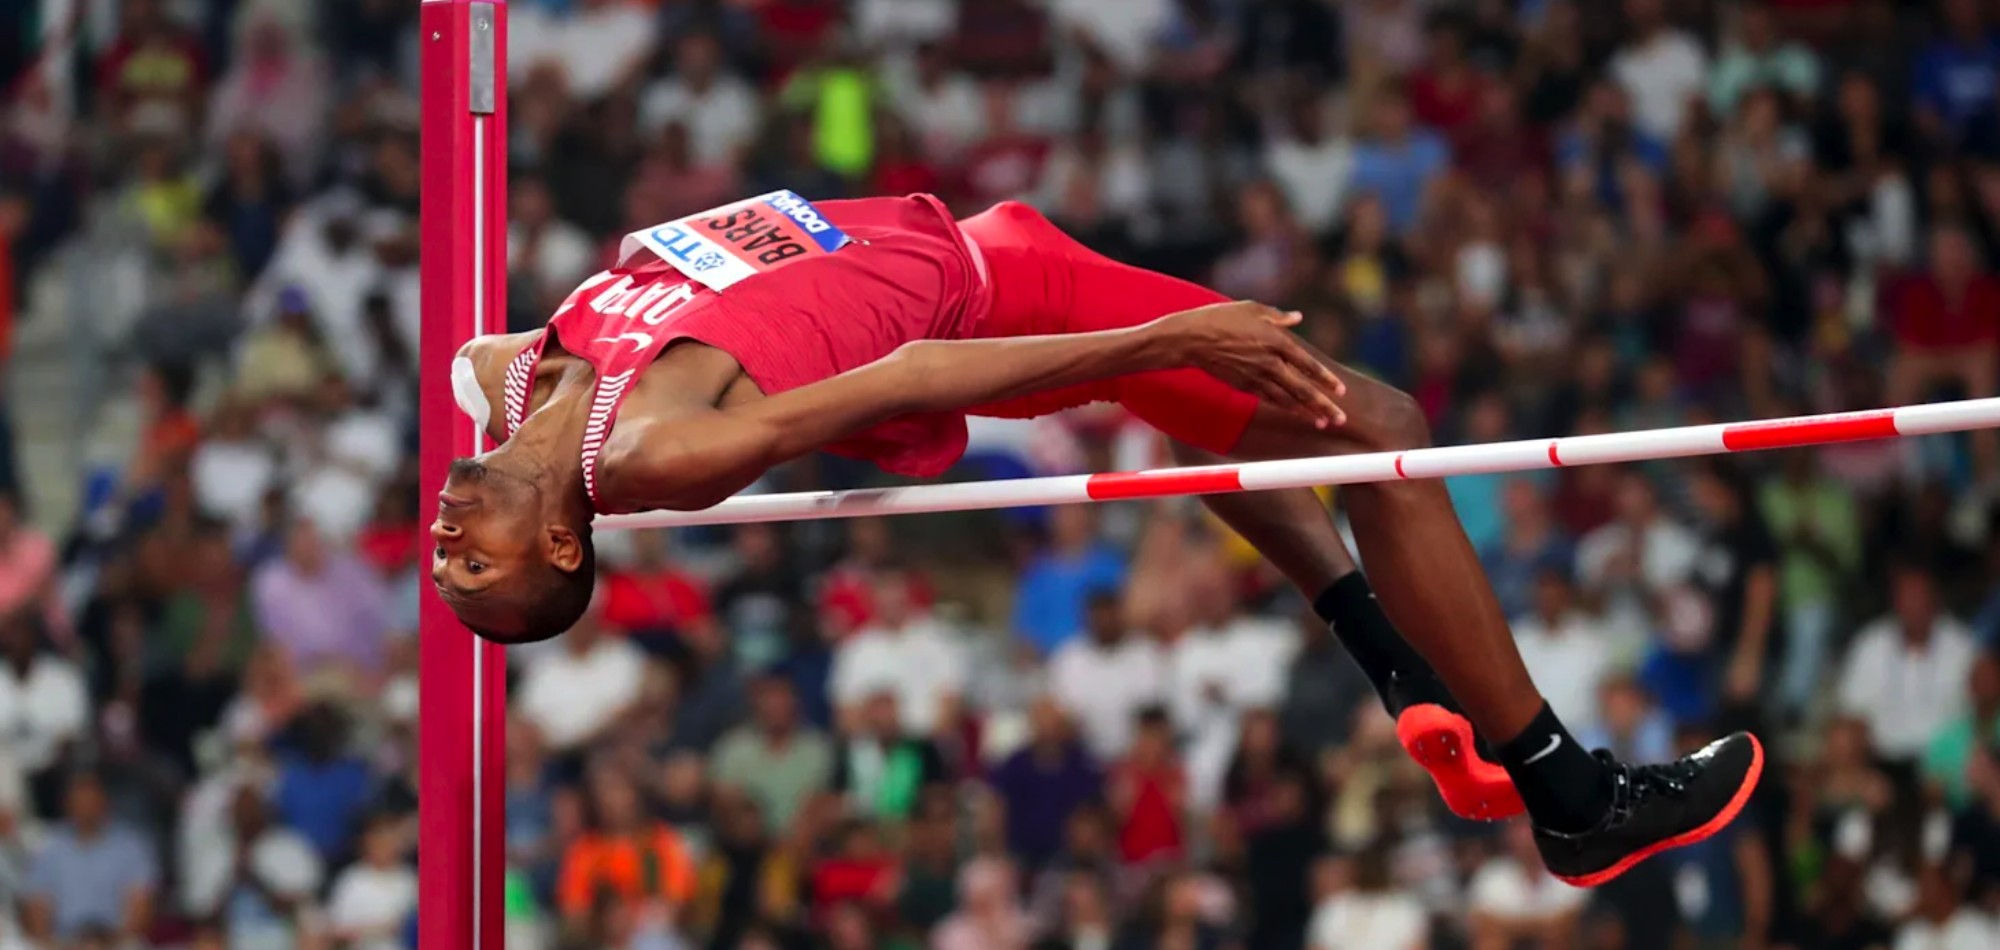 Getting back to competition important, says Barshim as he targets Tokyo